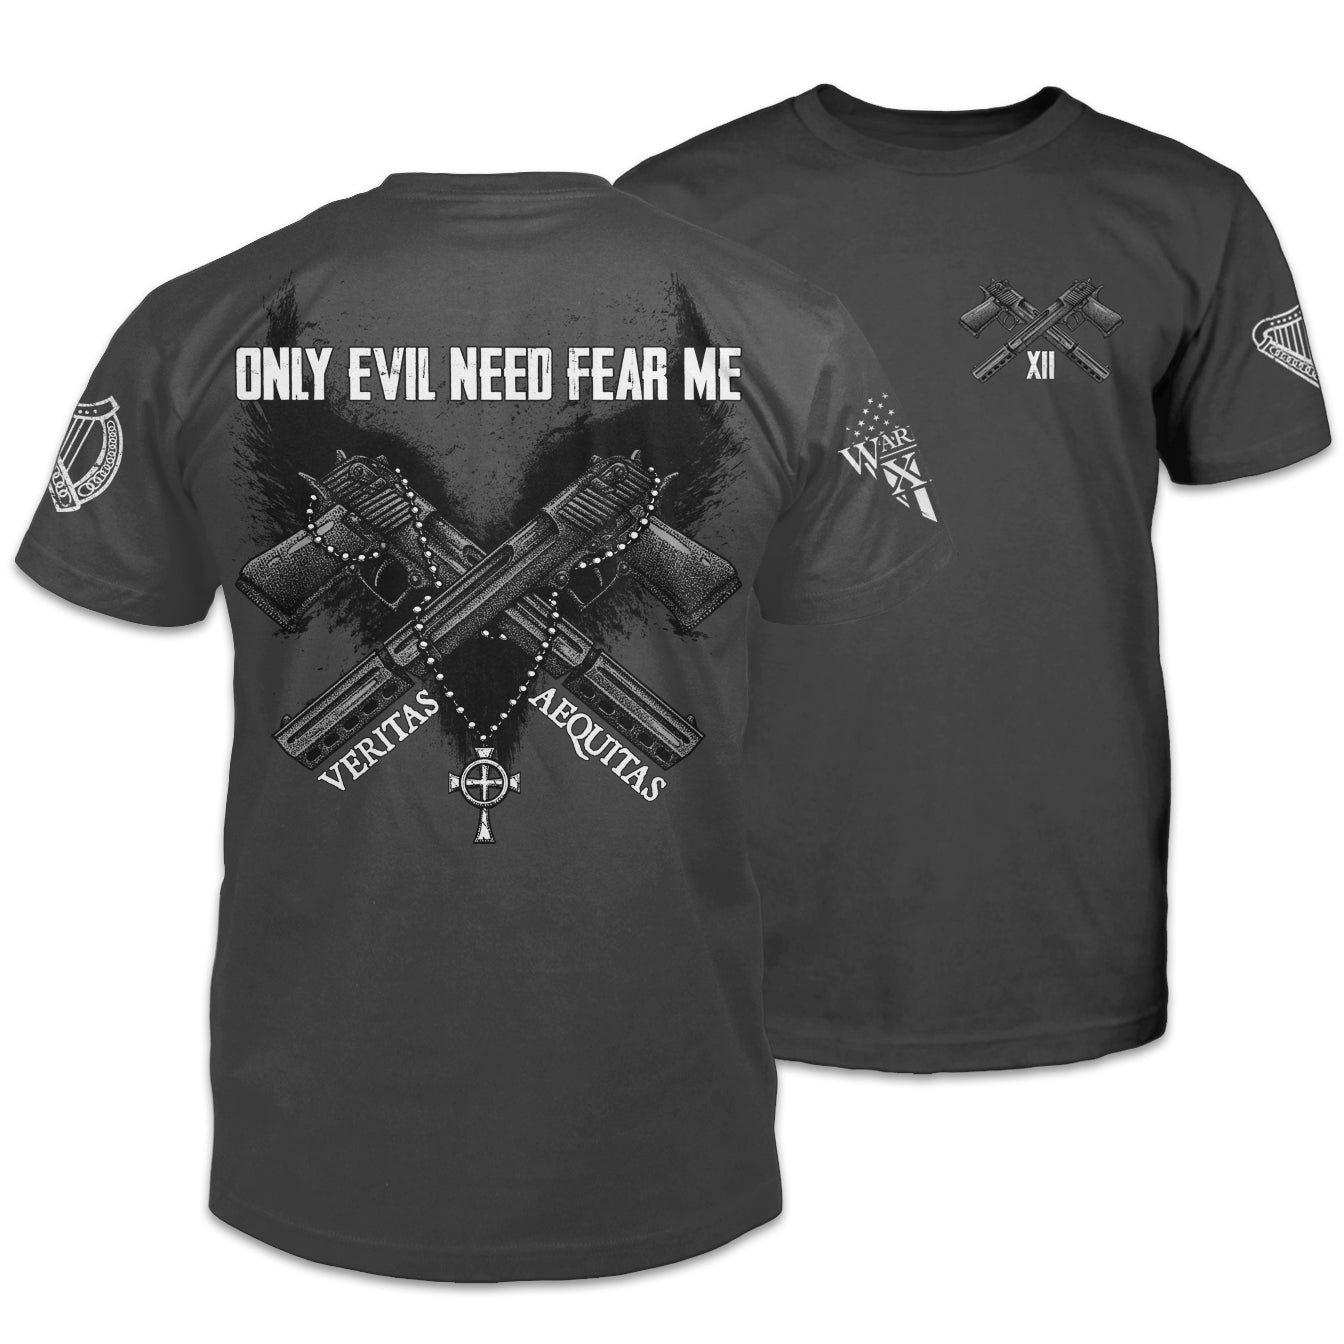 Front & back dark grey  t-shirt with the words "Only evil need fear me" which is an an old Irish saying; a warning against those who would prey on others with two guns printed on the shirt.